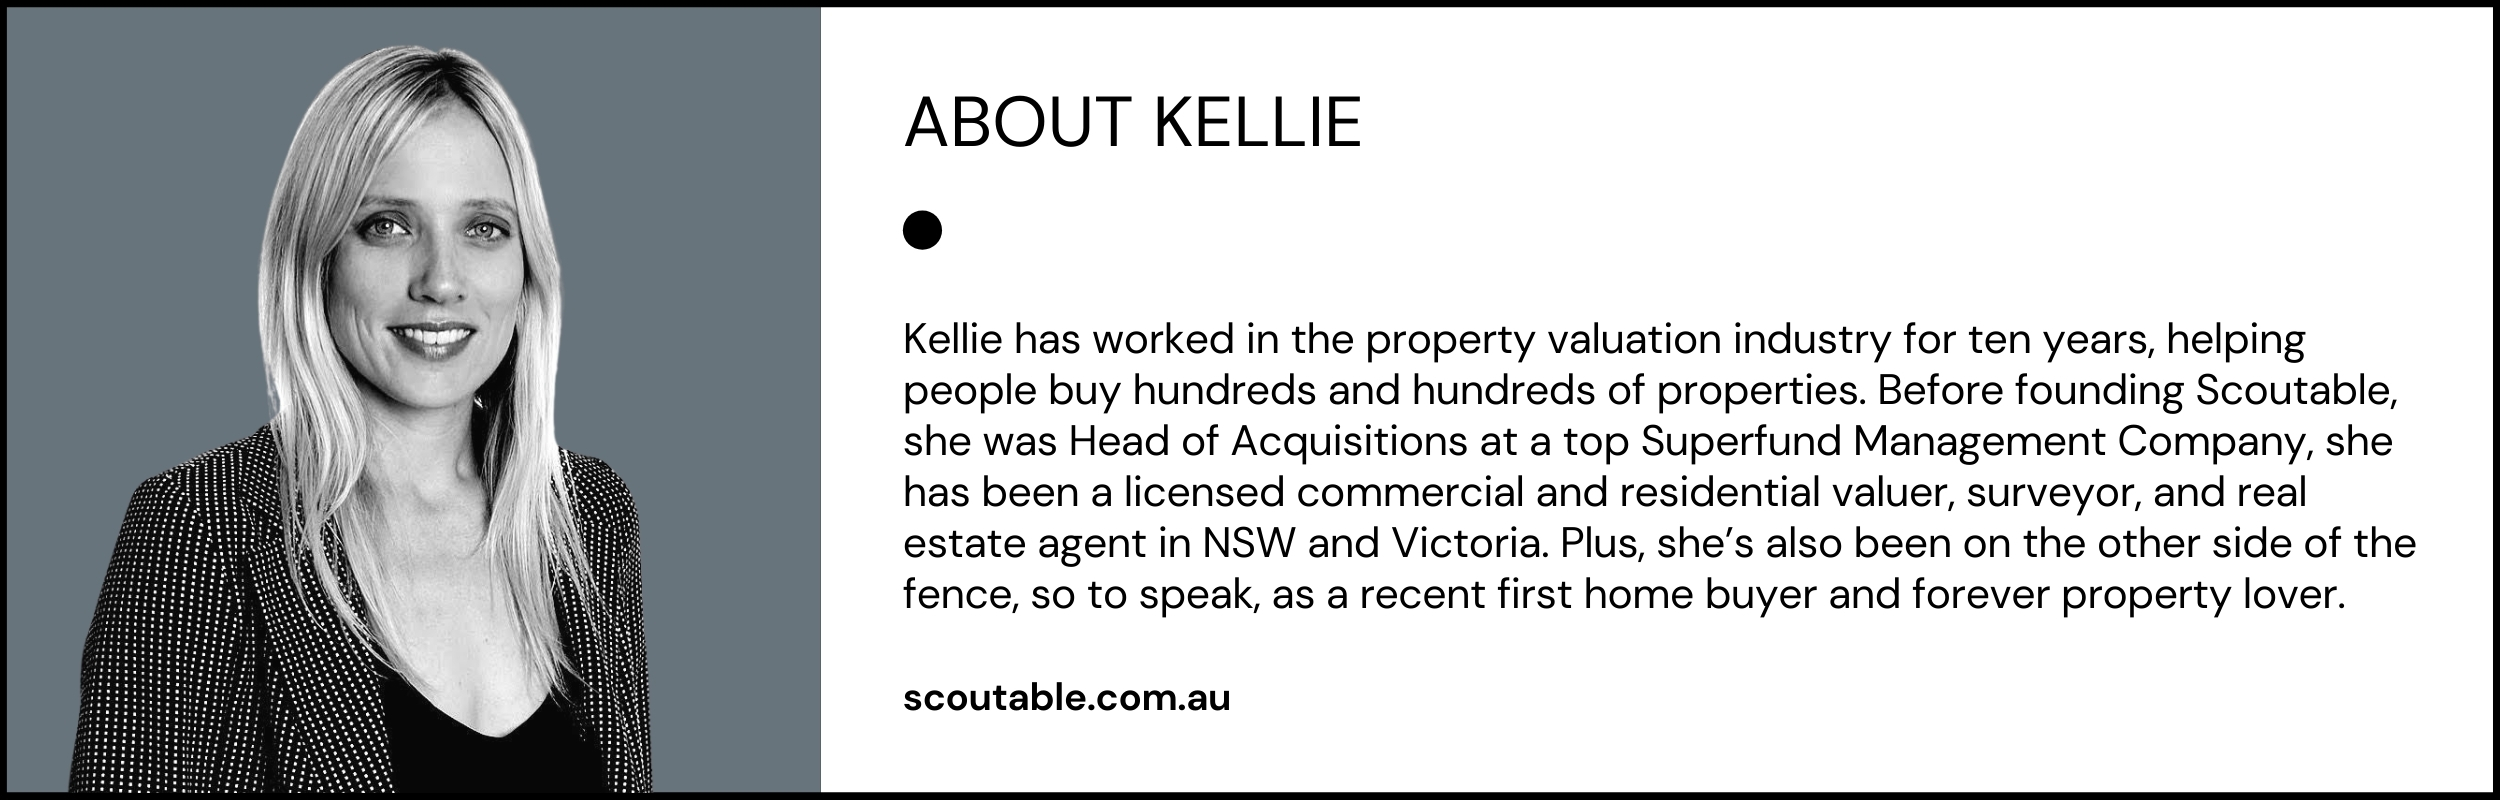 About: Kellie Landrey from Scoutable